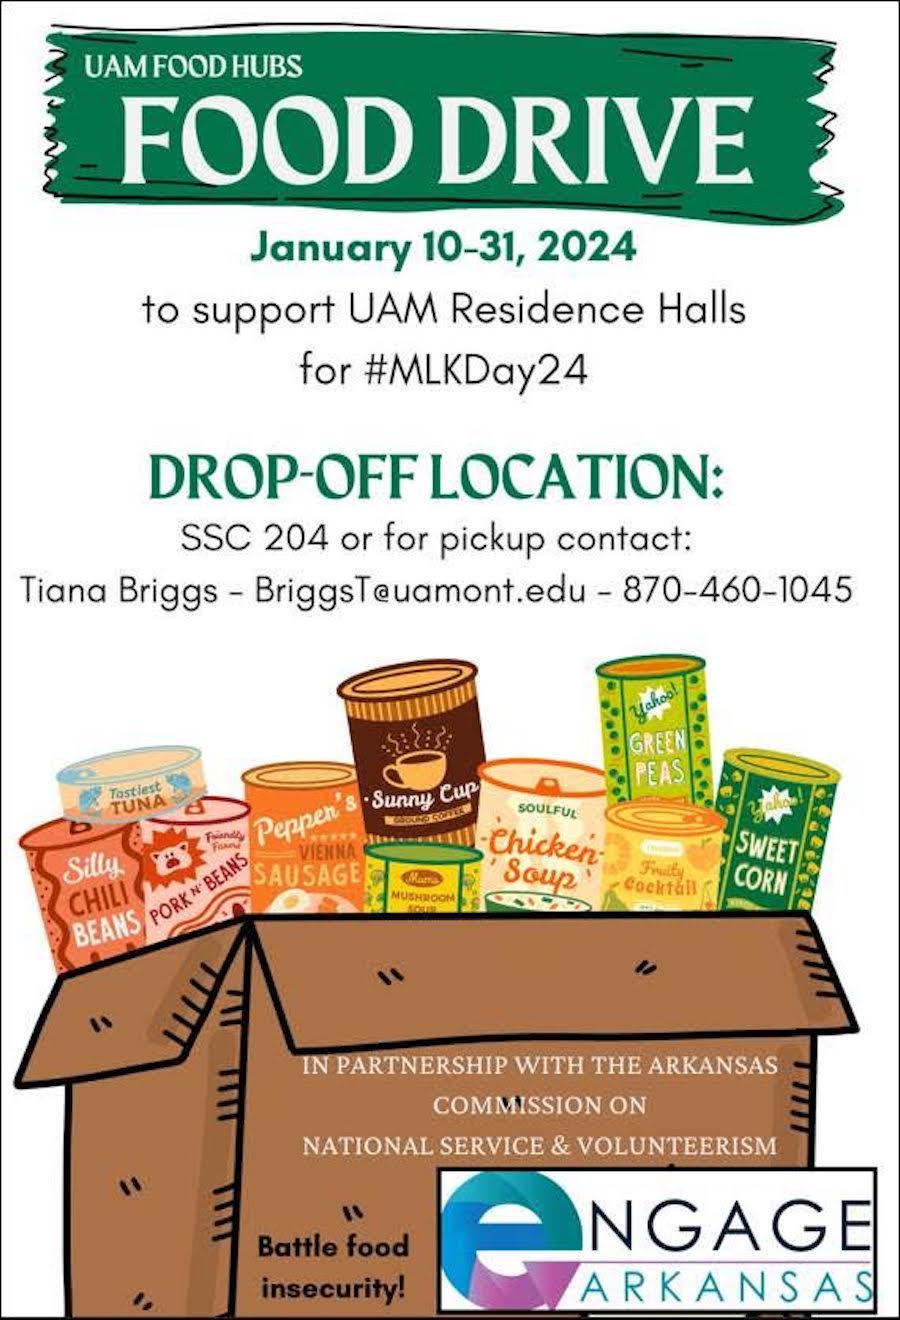 UAM Food Drive happening now through January 31